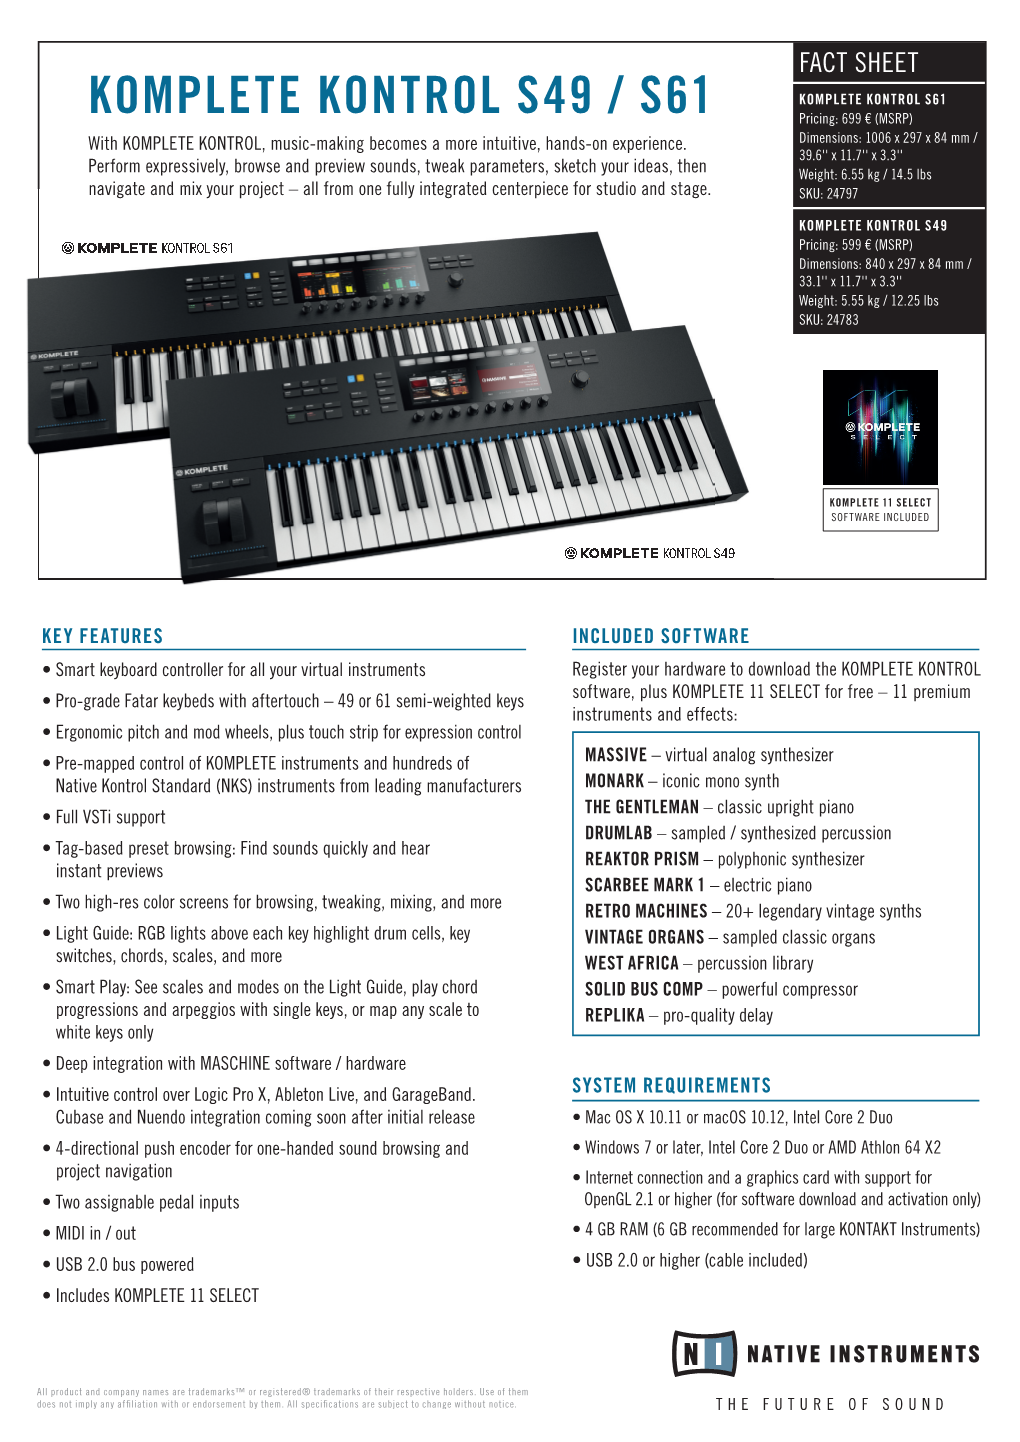 KOMPLETE KONTROL S49 / S61 Pricing: 699 € (MSRP) with KOMPLETE KONTROL, Music-Making Becomes a More Intuitive, Hands-On Experience